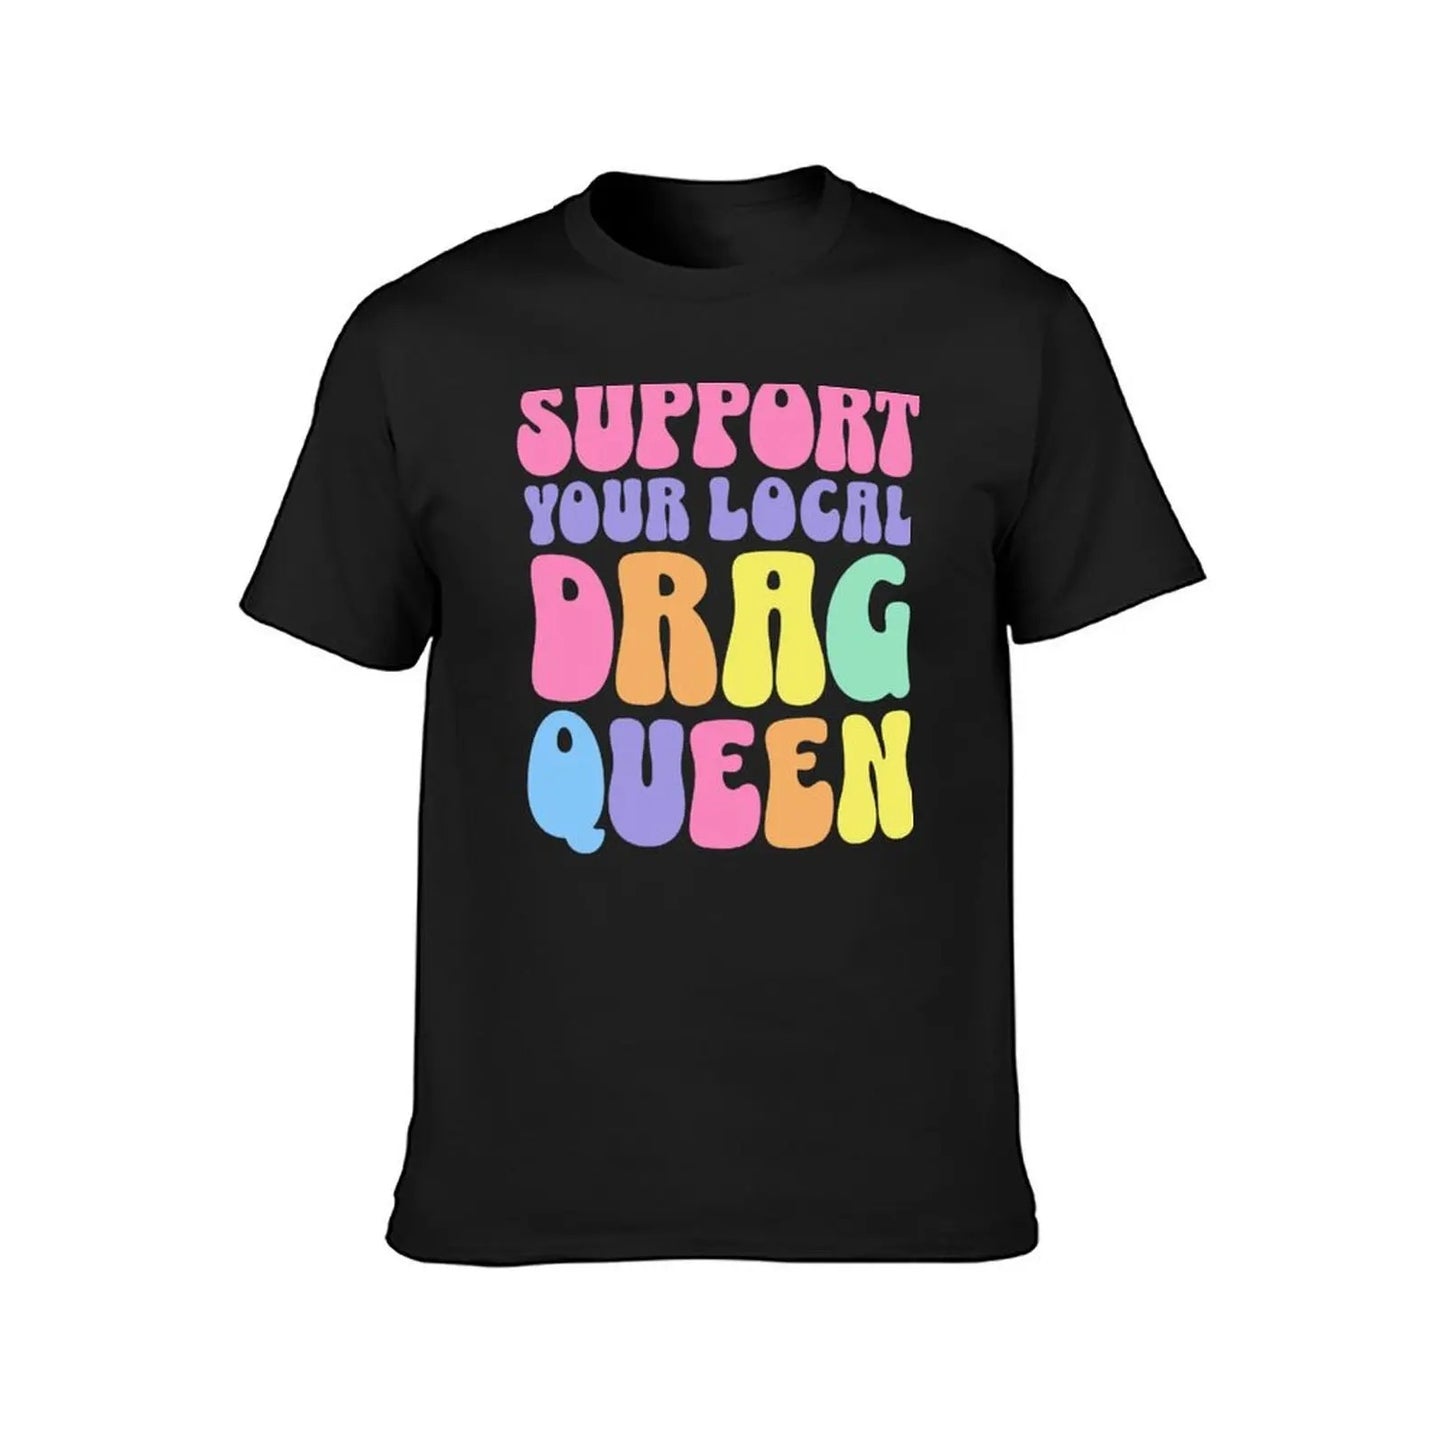 Support Your Local Drag Queen T-Shirt